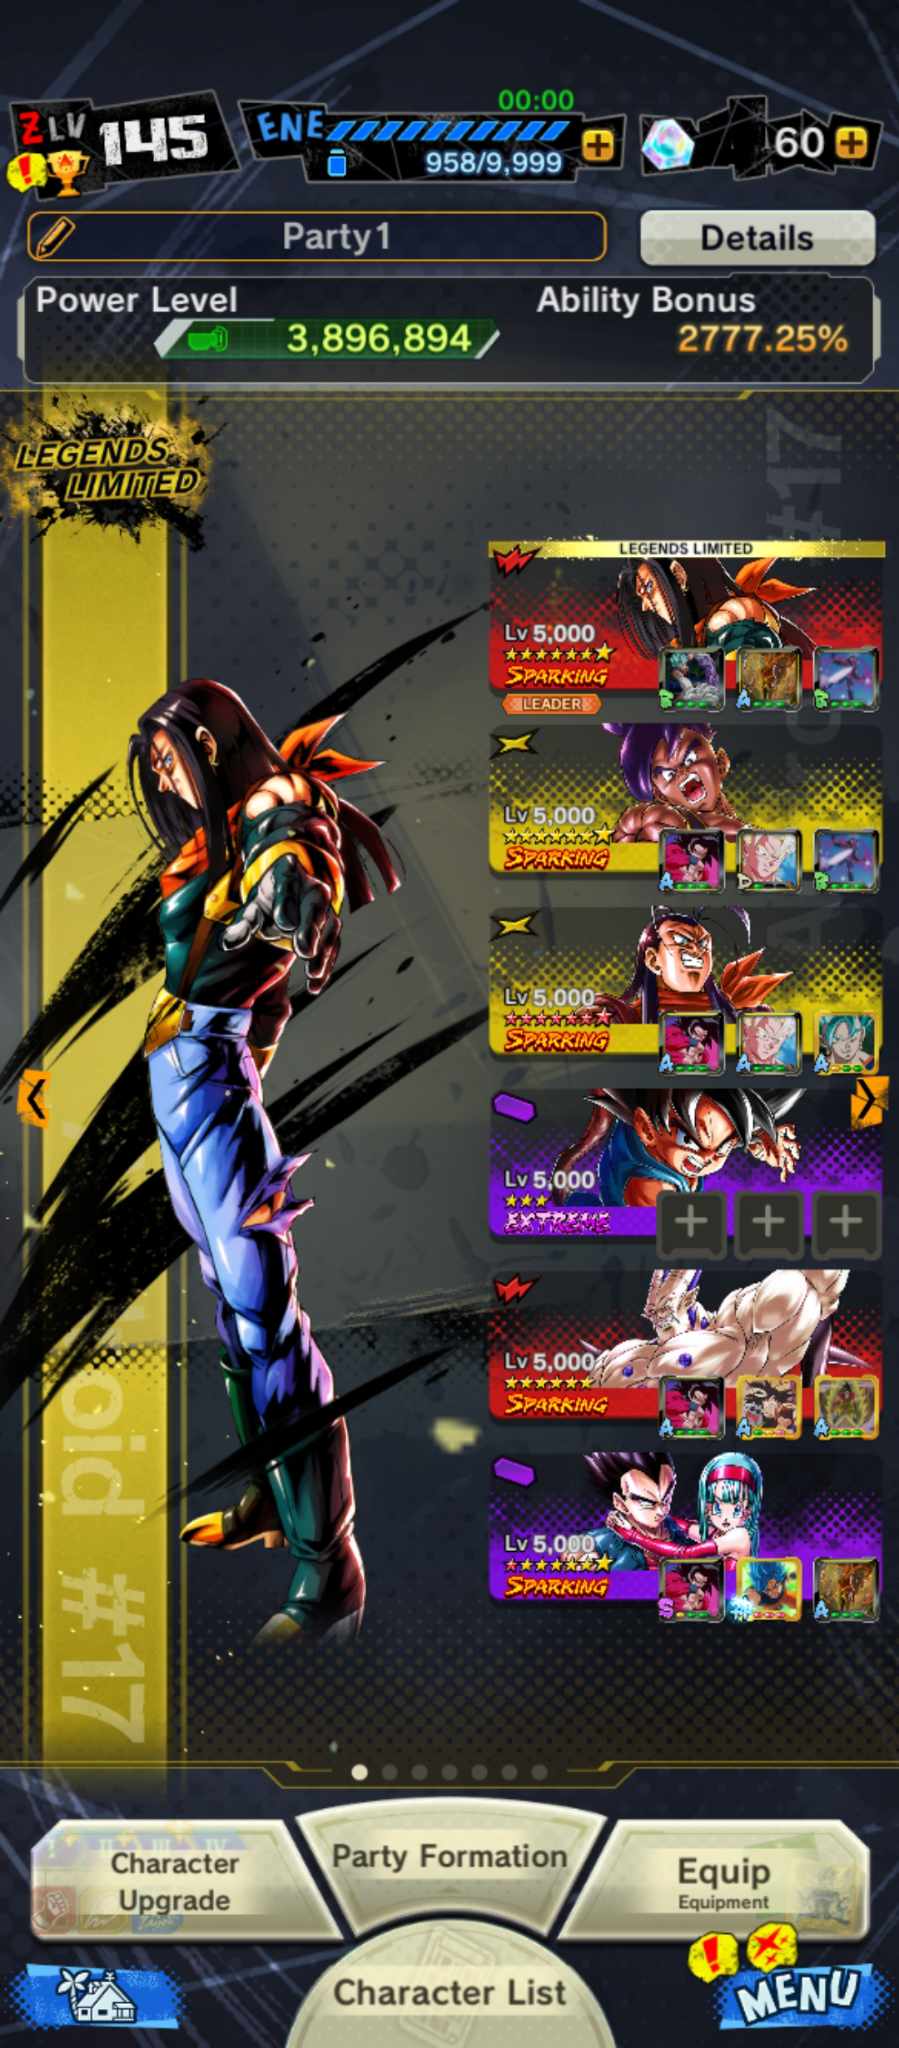 ANDROID + IOS, LOGIN BANDAI, 5 legend limited, Android 17 stelle complete, Soul 10k